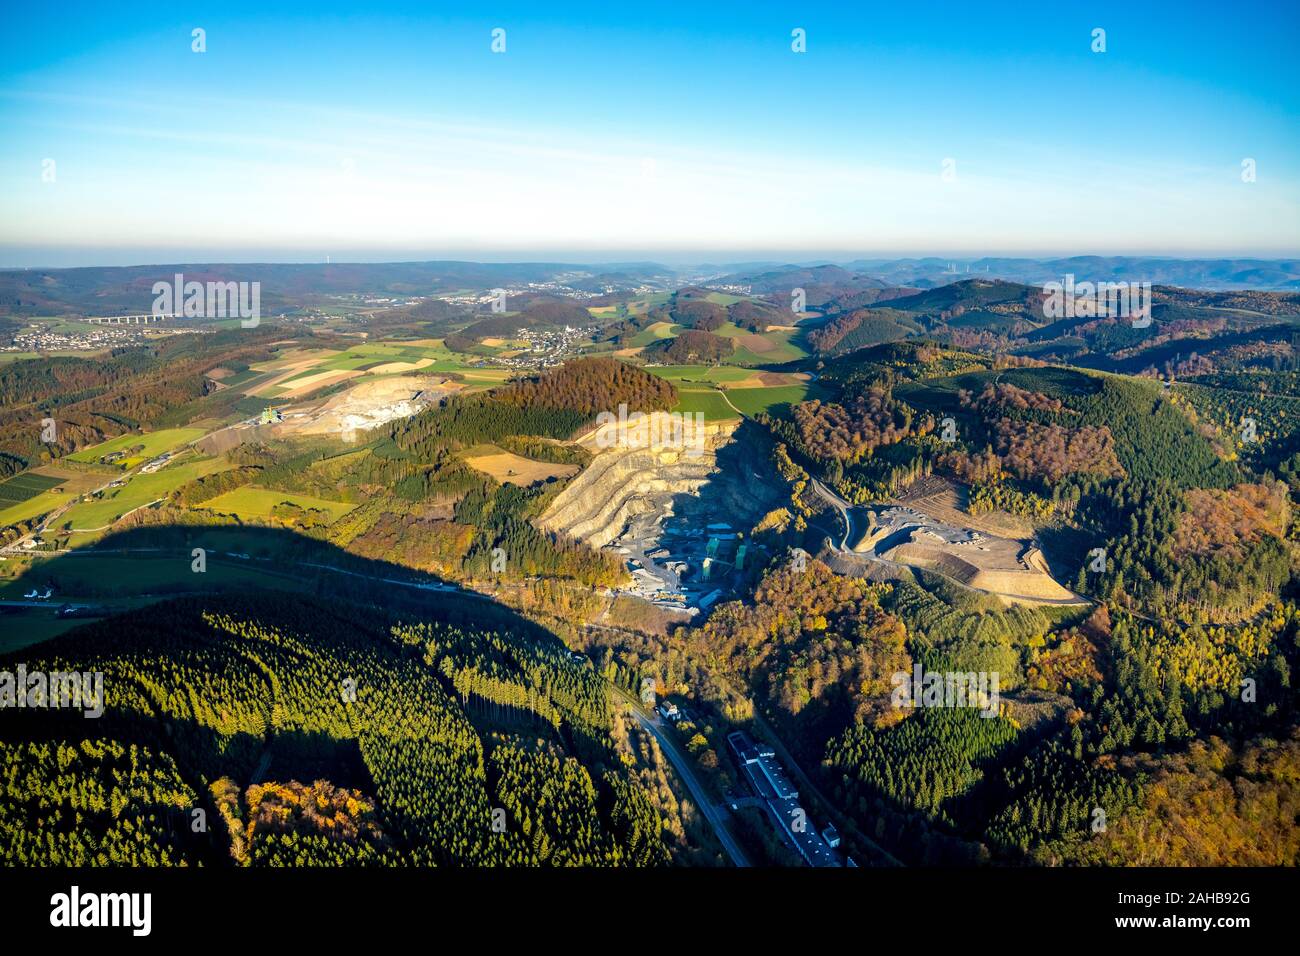 Aerial photograph, WGU Berge am Kanzenberg quarry, Meschede, Sauerland, North Rhine-Westphalia, Germany, mountains and valleys, DE, Europe, distant vi Stock Photo